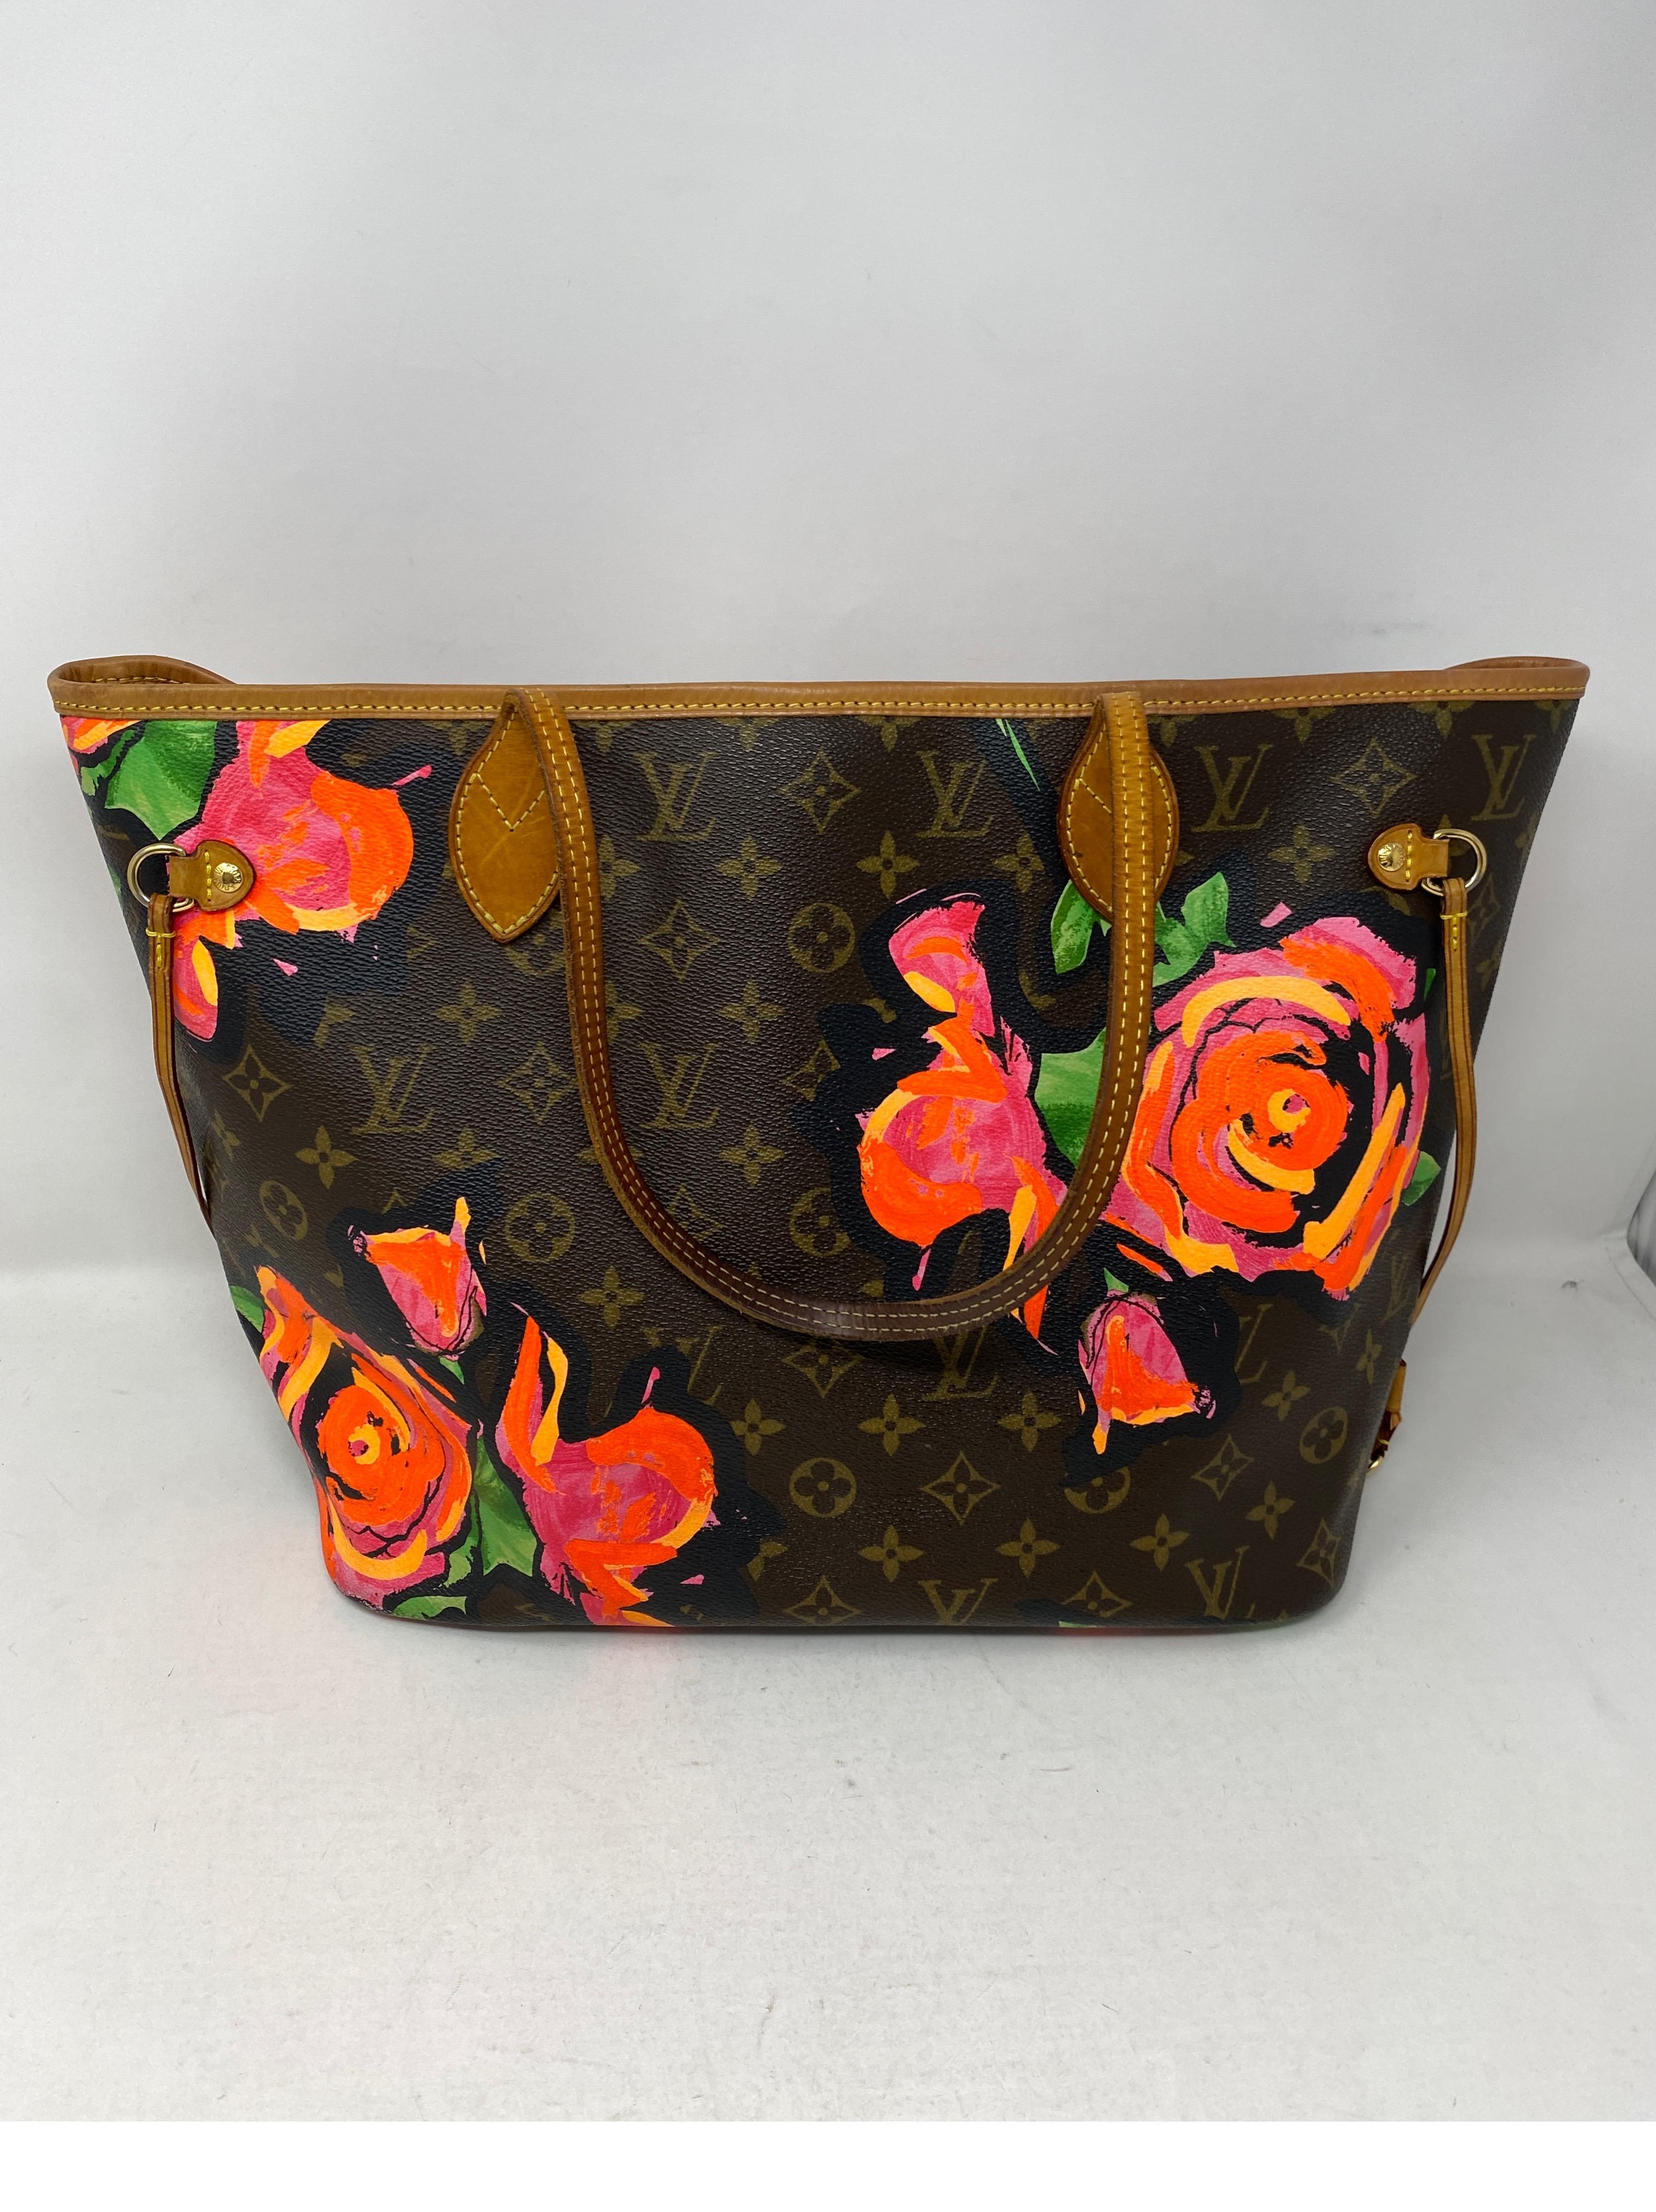 Louis Vuitton Roses by Stephen Sprouse Neverfull Bag. Iconic designer Stephen Sprouse. Collector's piece. Limited and rare bag. Handles have nice patina over time. Fair to good condition overall. Light wear inside tote. Guaranteed authentic. 